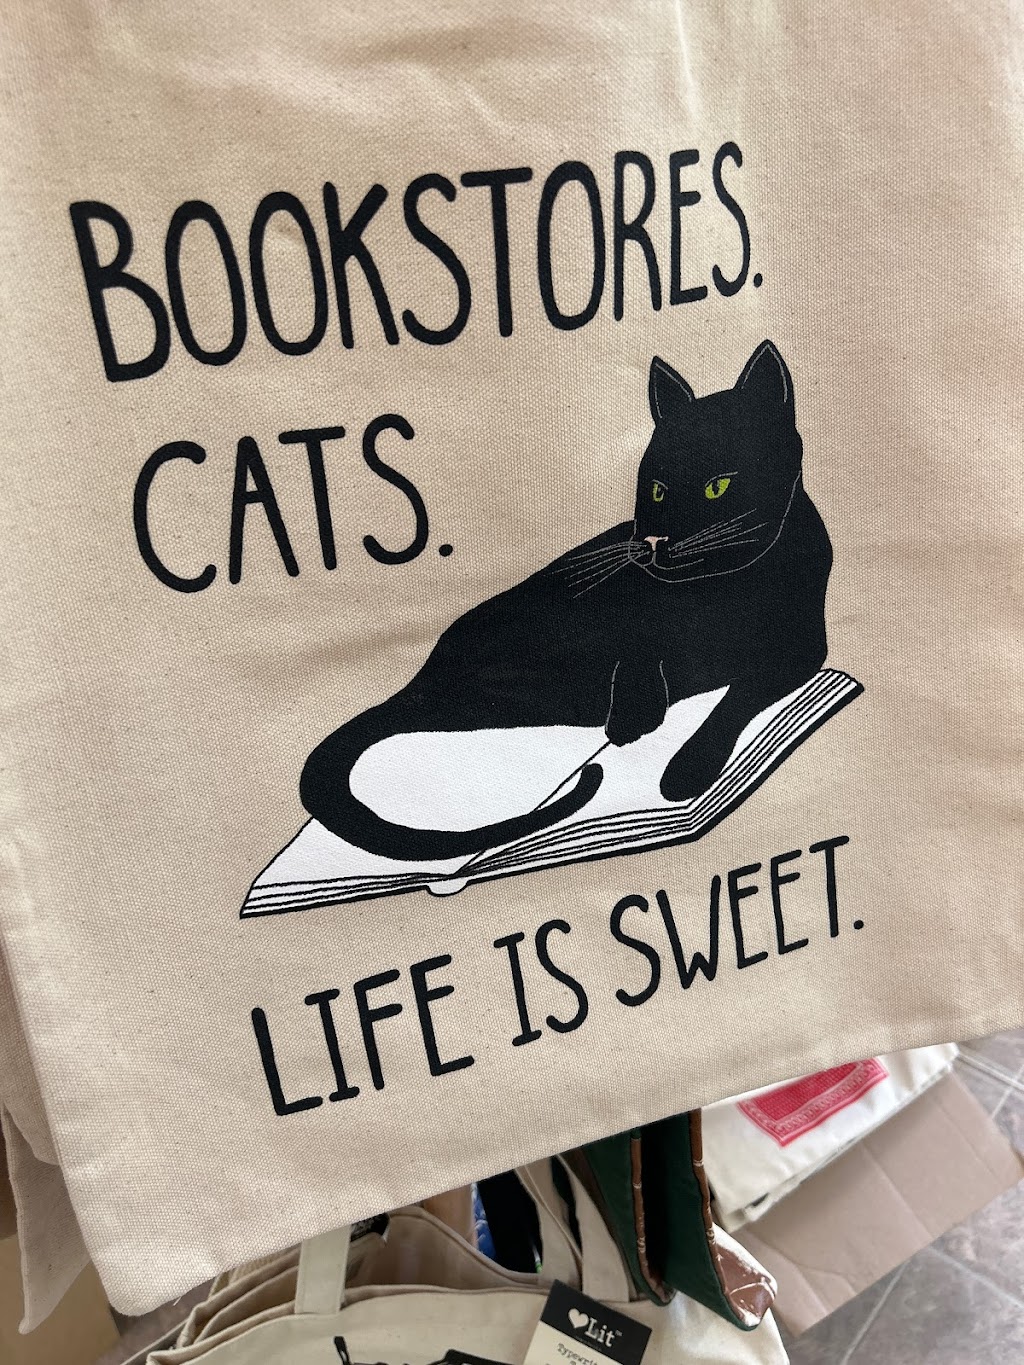 The Curious Cat Bookshop | 386 Main St, Winsted, CT 06098 | Phone: (860) 909-1014